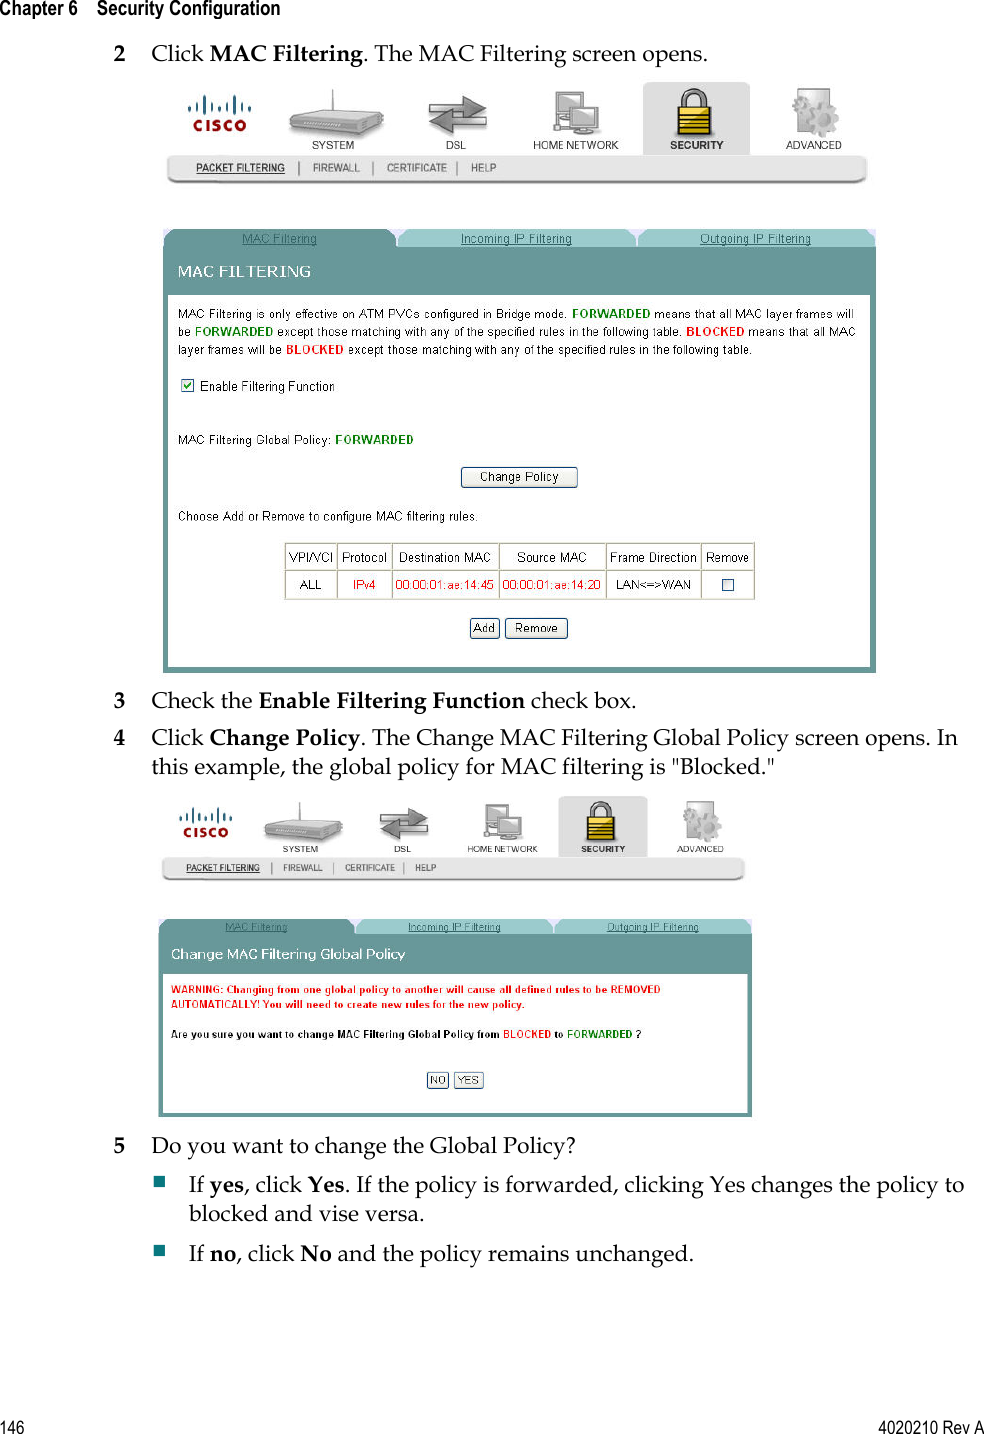  Chapter 6    Security Configuration   146  4020210 Rev A 2 Click MAC Filtering. The MAC Filtering screen opens.  3 Check the Enable Filtering Function check box. 4 Click Change Policy. The Change MAC Filtering Global Policy screen opens. In this example, the global policy for MAC filtering is &quot;Blocked.&quot;  5 Do you want to change the Global Policy?  If yes, click Yes. If the policy is forwarded, clicking Yes changes the policy to blocked and vise versa.  If no, click No and the policy remains unchanged.  